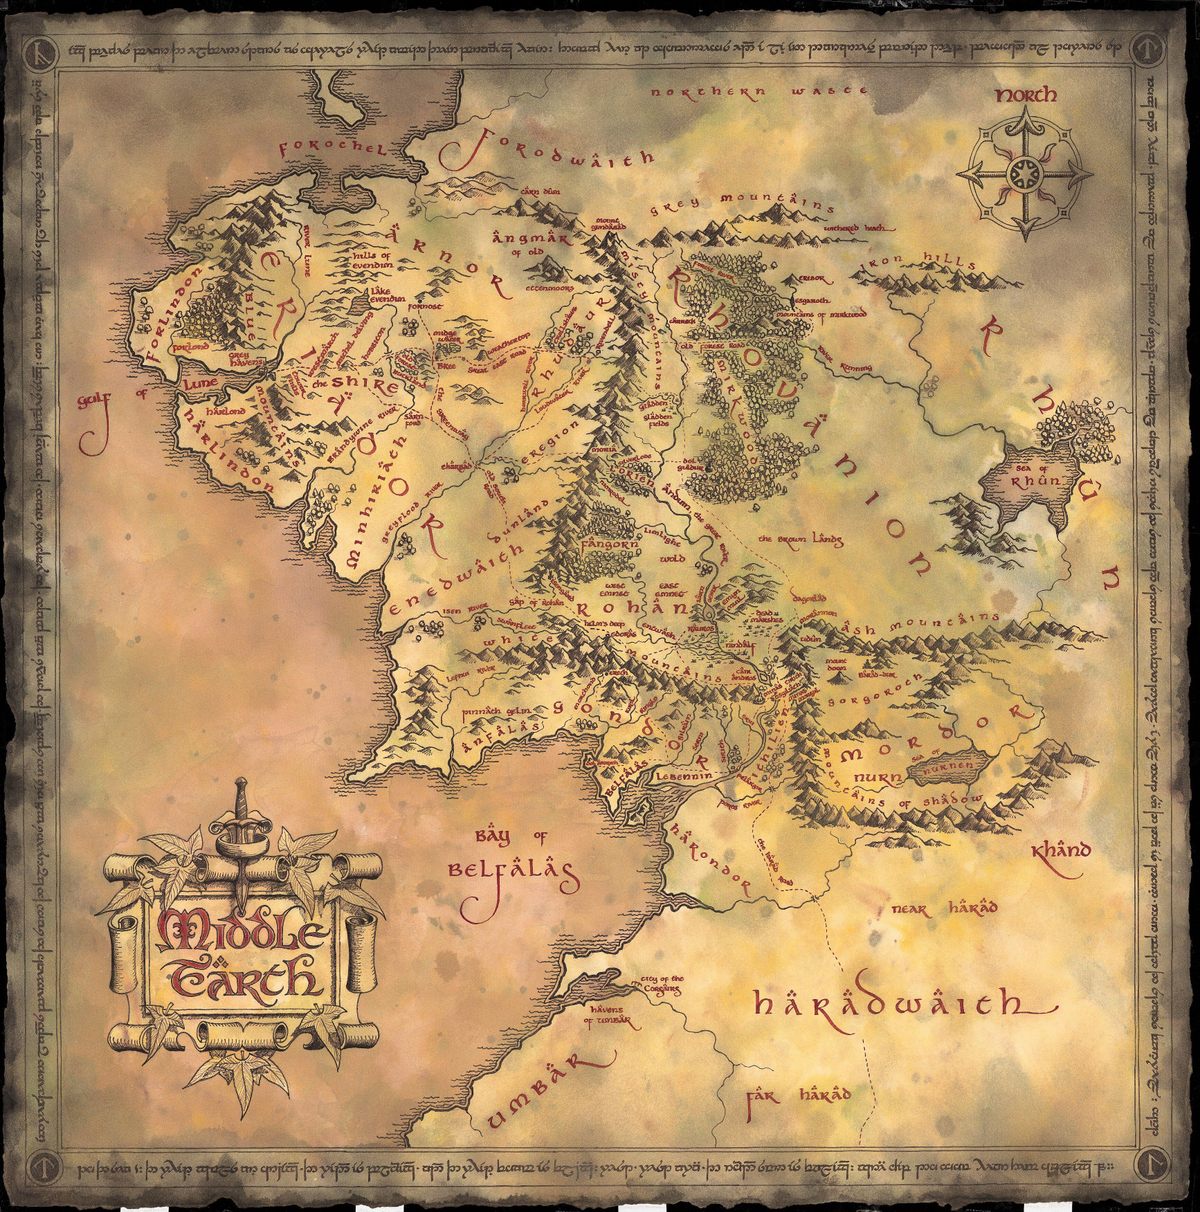 The map from Lord of the Rings doesn’t look like any place on Earth, but seems to pull inspiration from different parts of the real world.